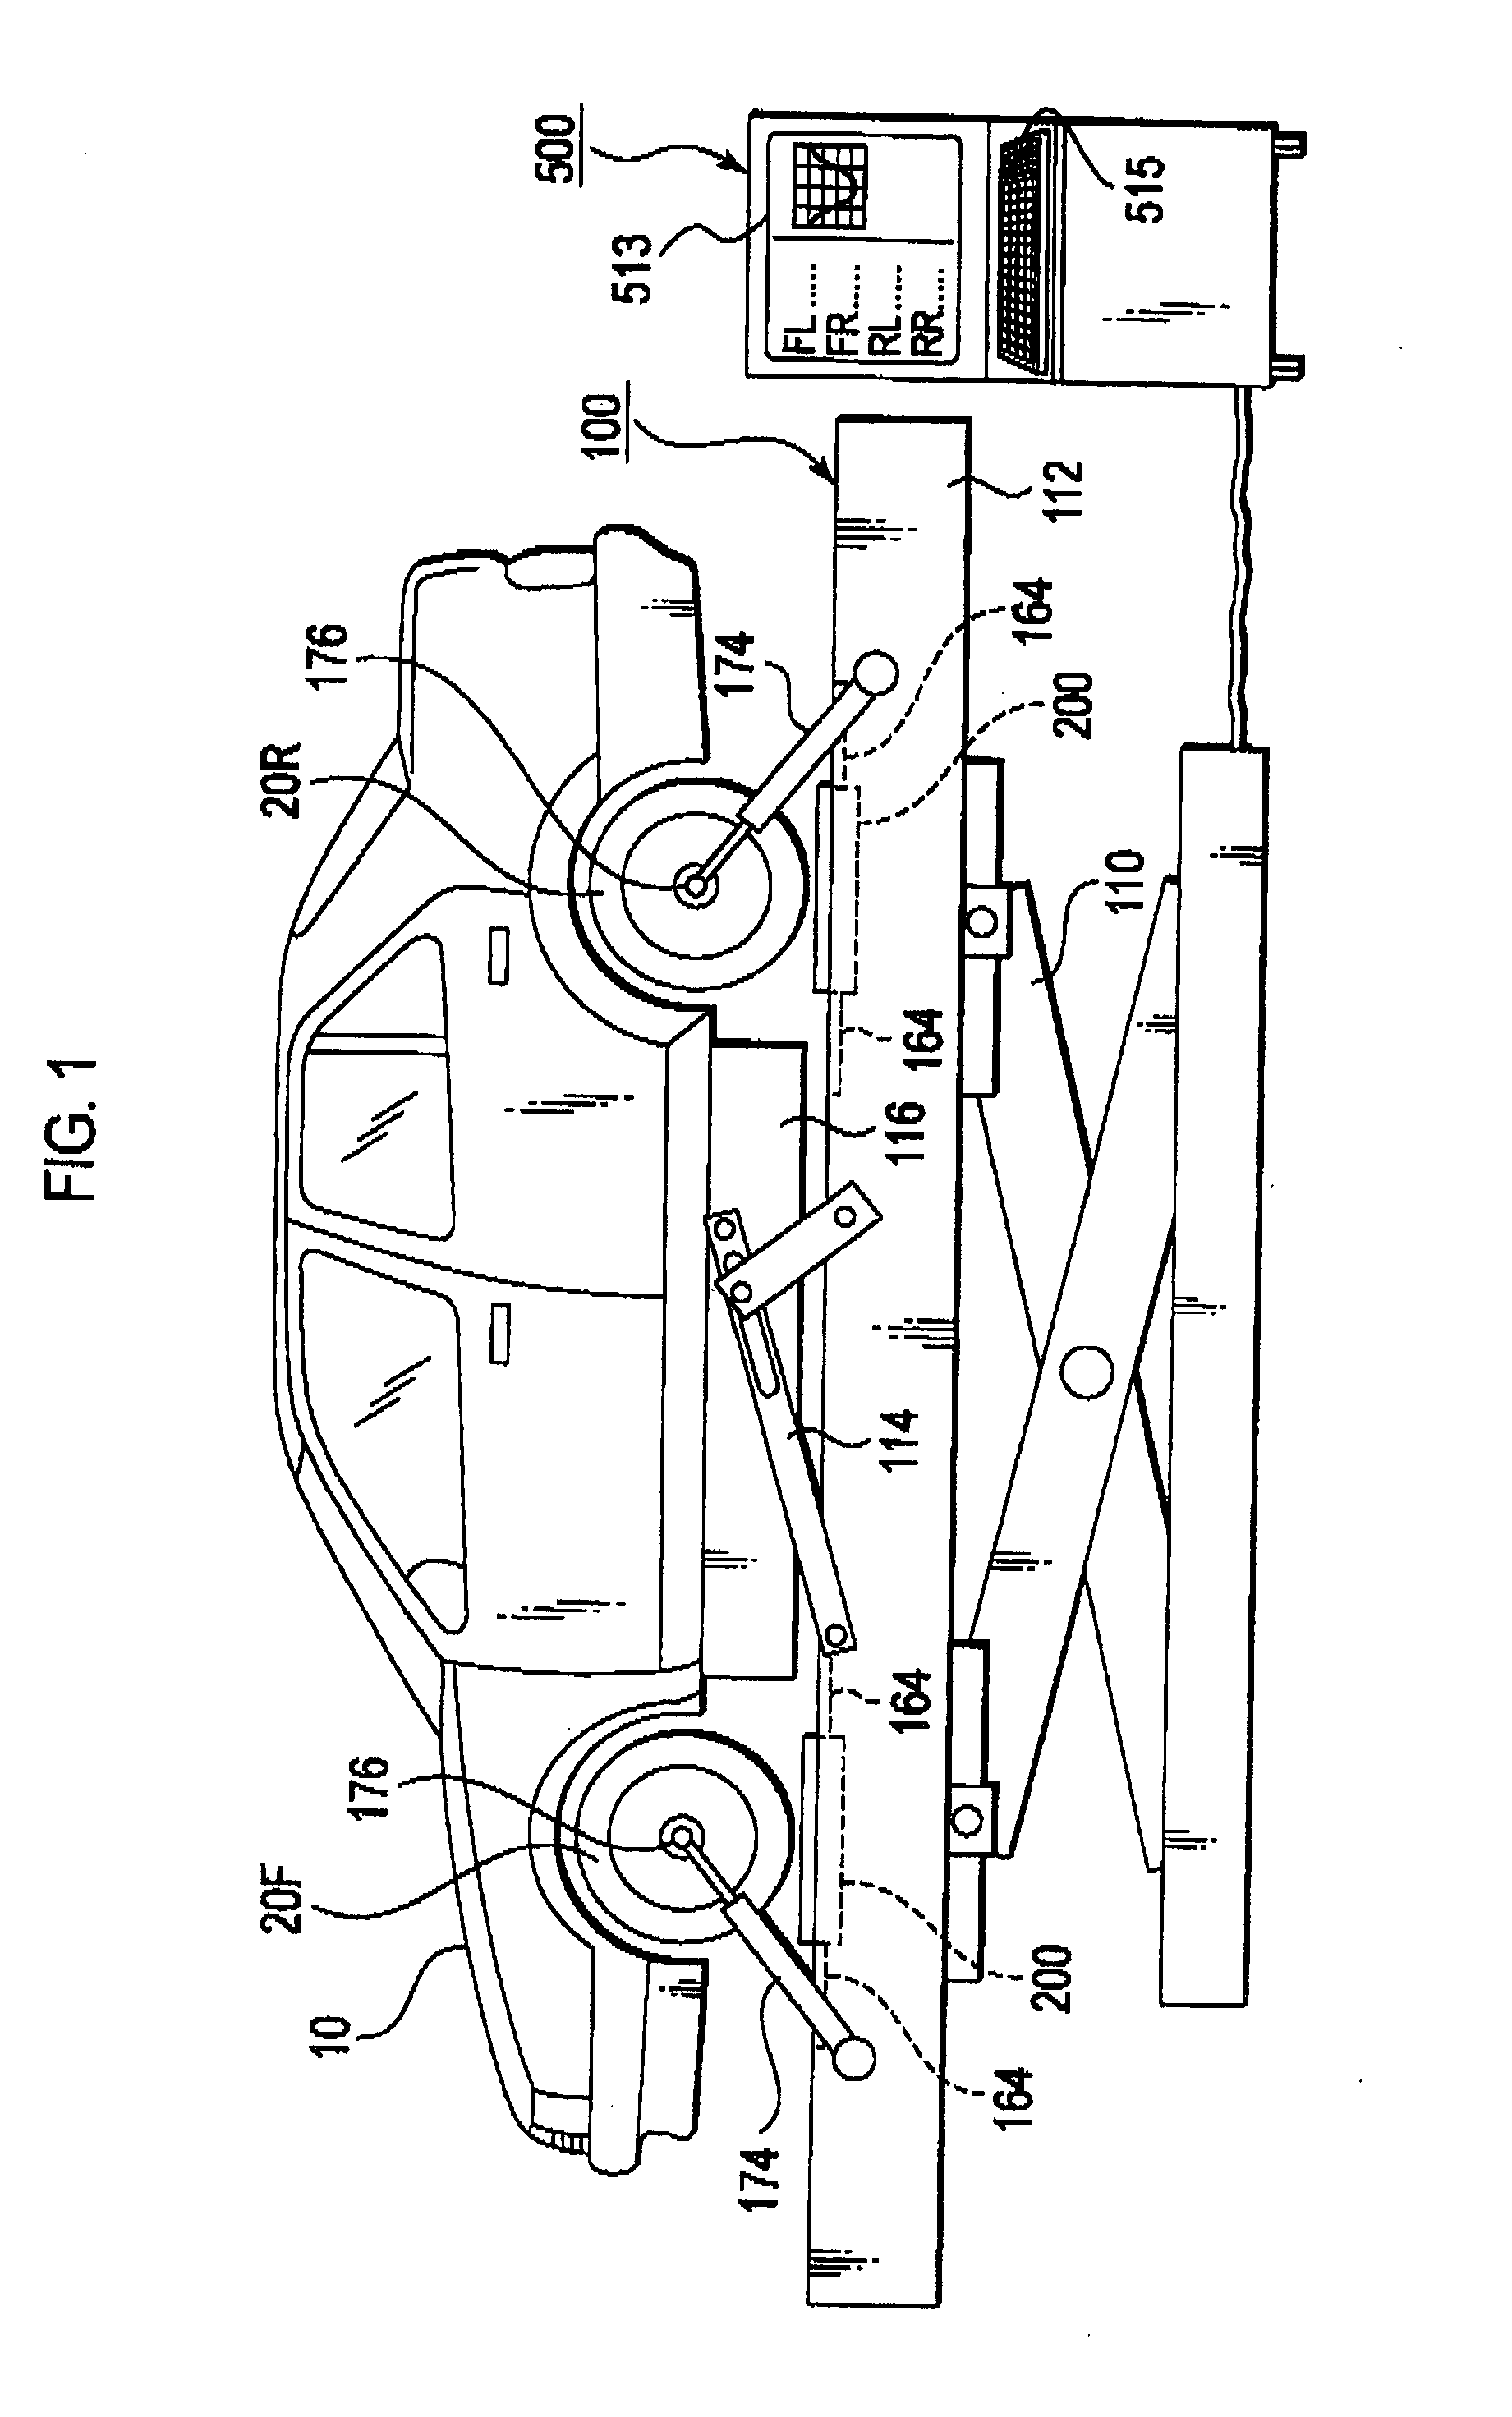 Wheel Allignment Angle Measuring Apparatus and Wheel Alignment Angle Measuring Method